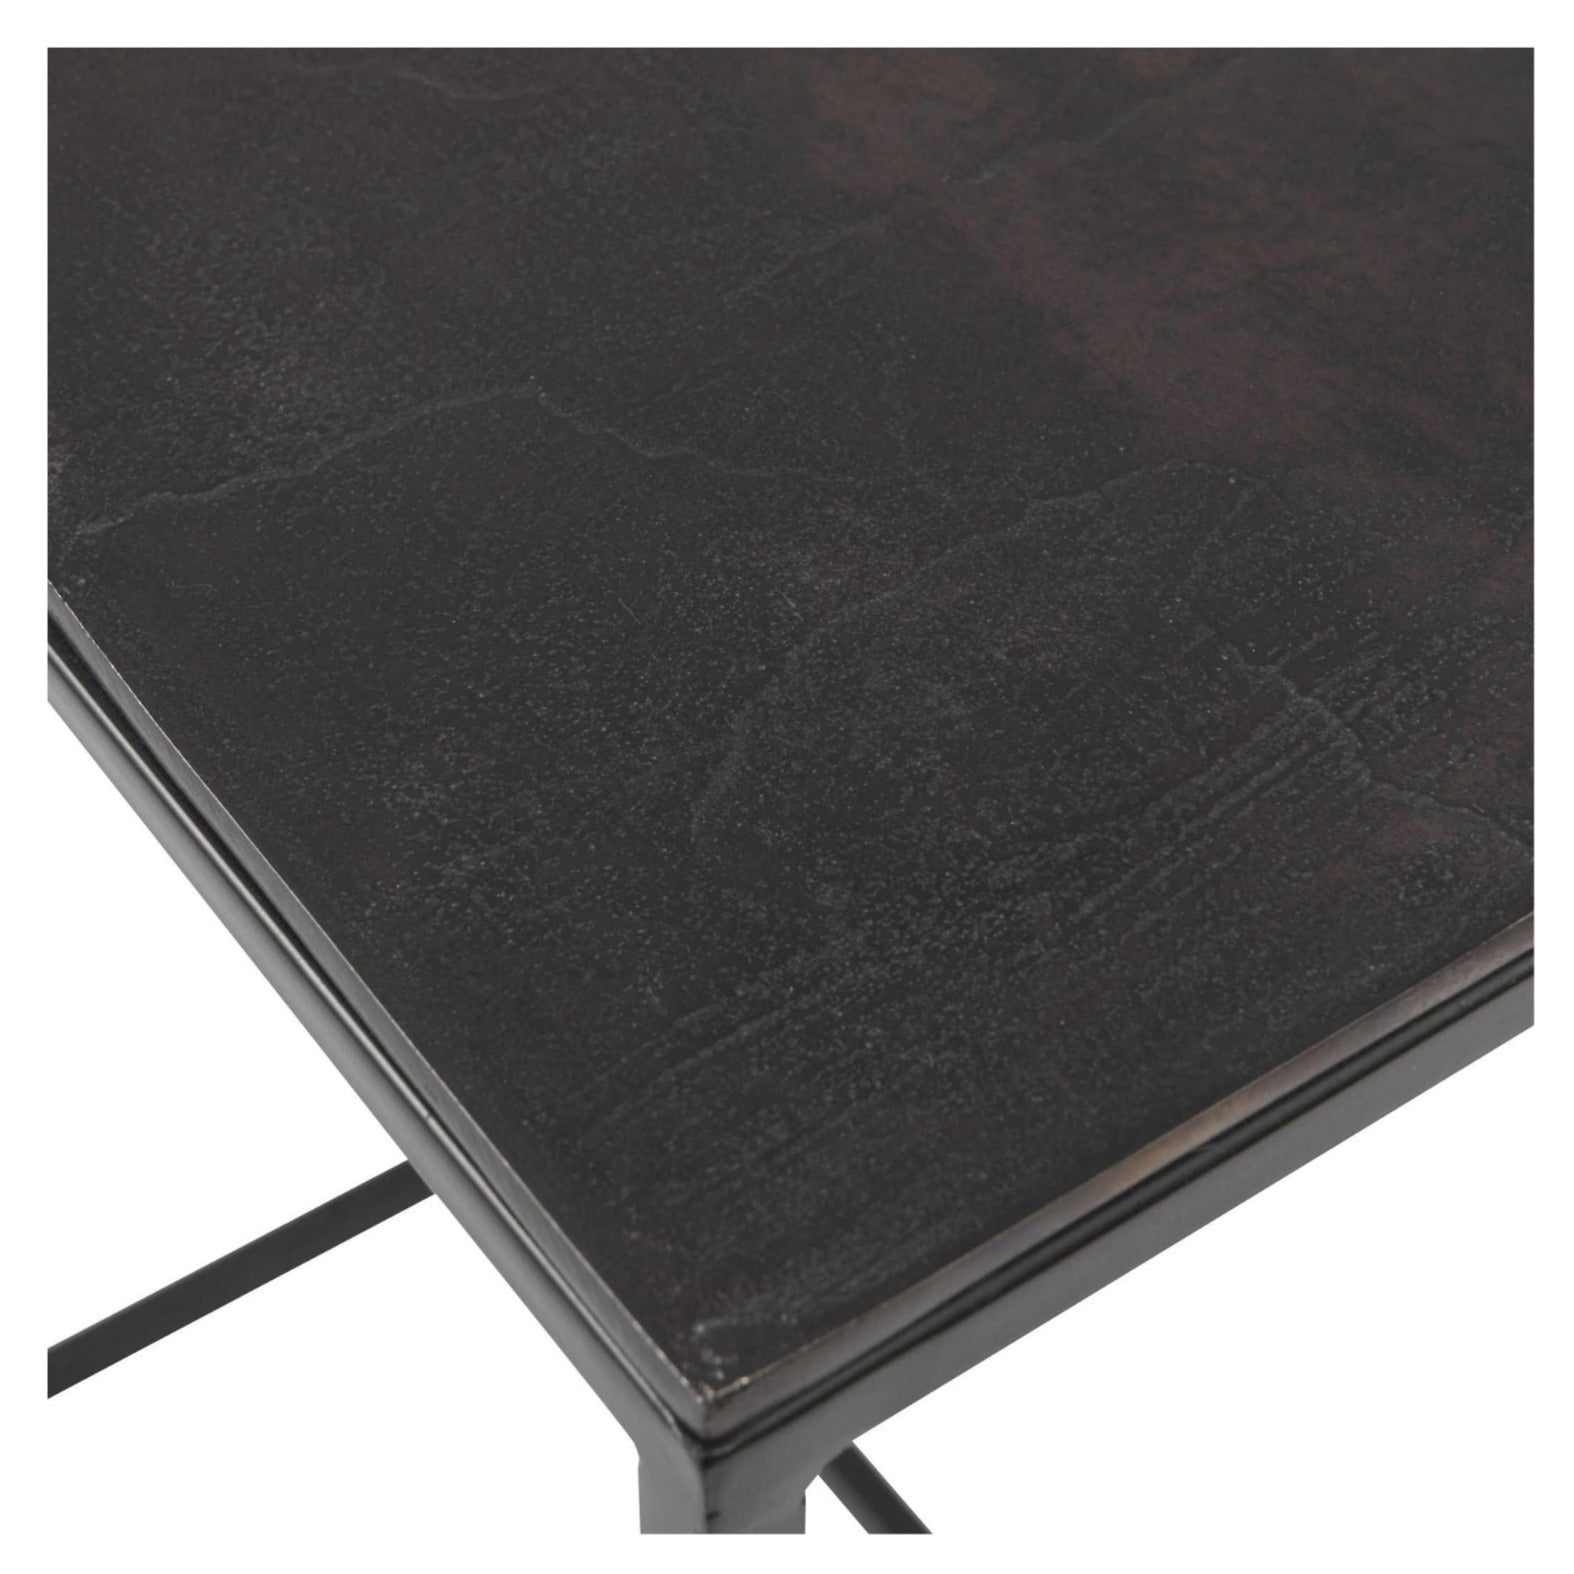 Shows black iron top detail for cast aluminum slab top finished in a plated antique bronze. Sizes: Sm-17x22x9, Med-20x24x10, Lg-21x26x11